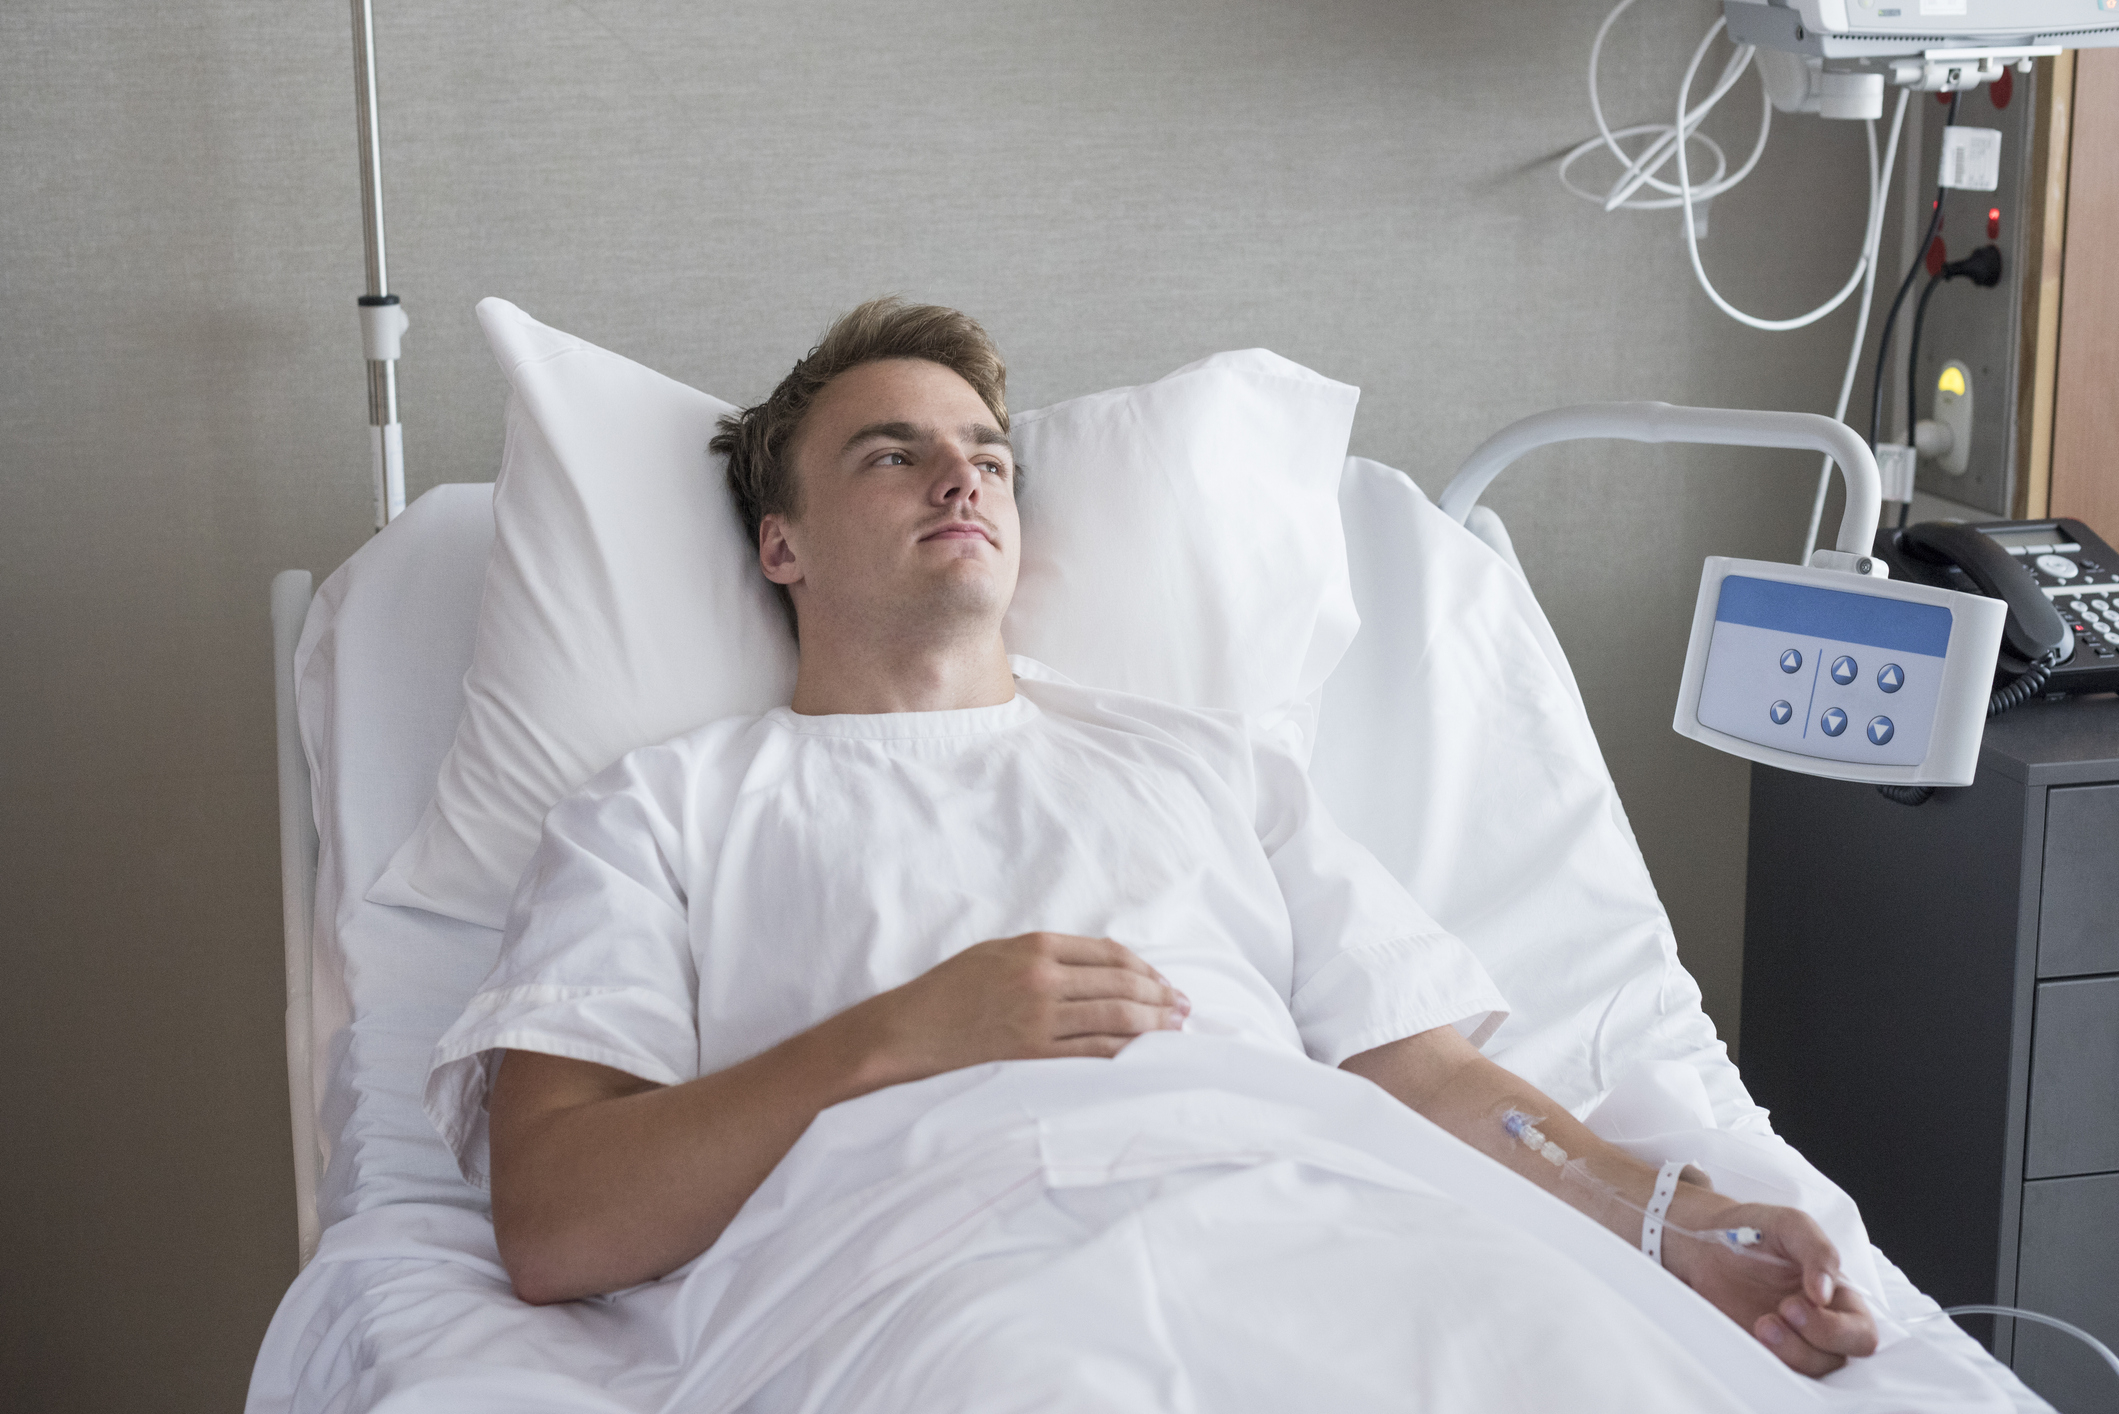 Person in a hospital bed with medical equipment in the background